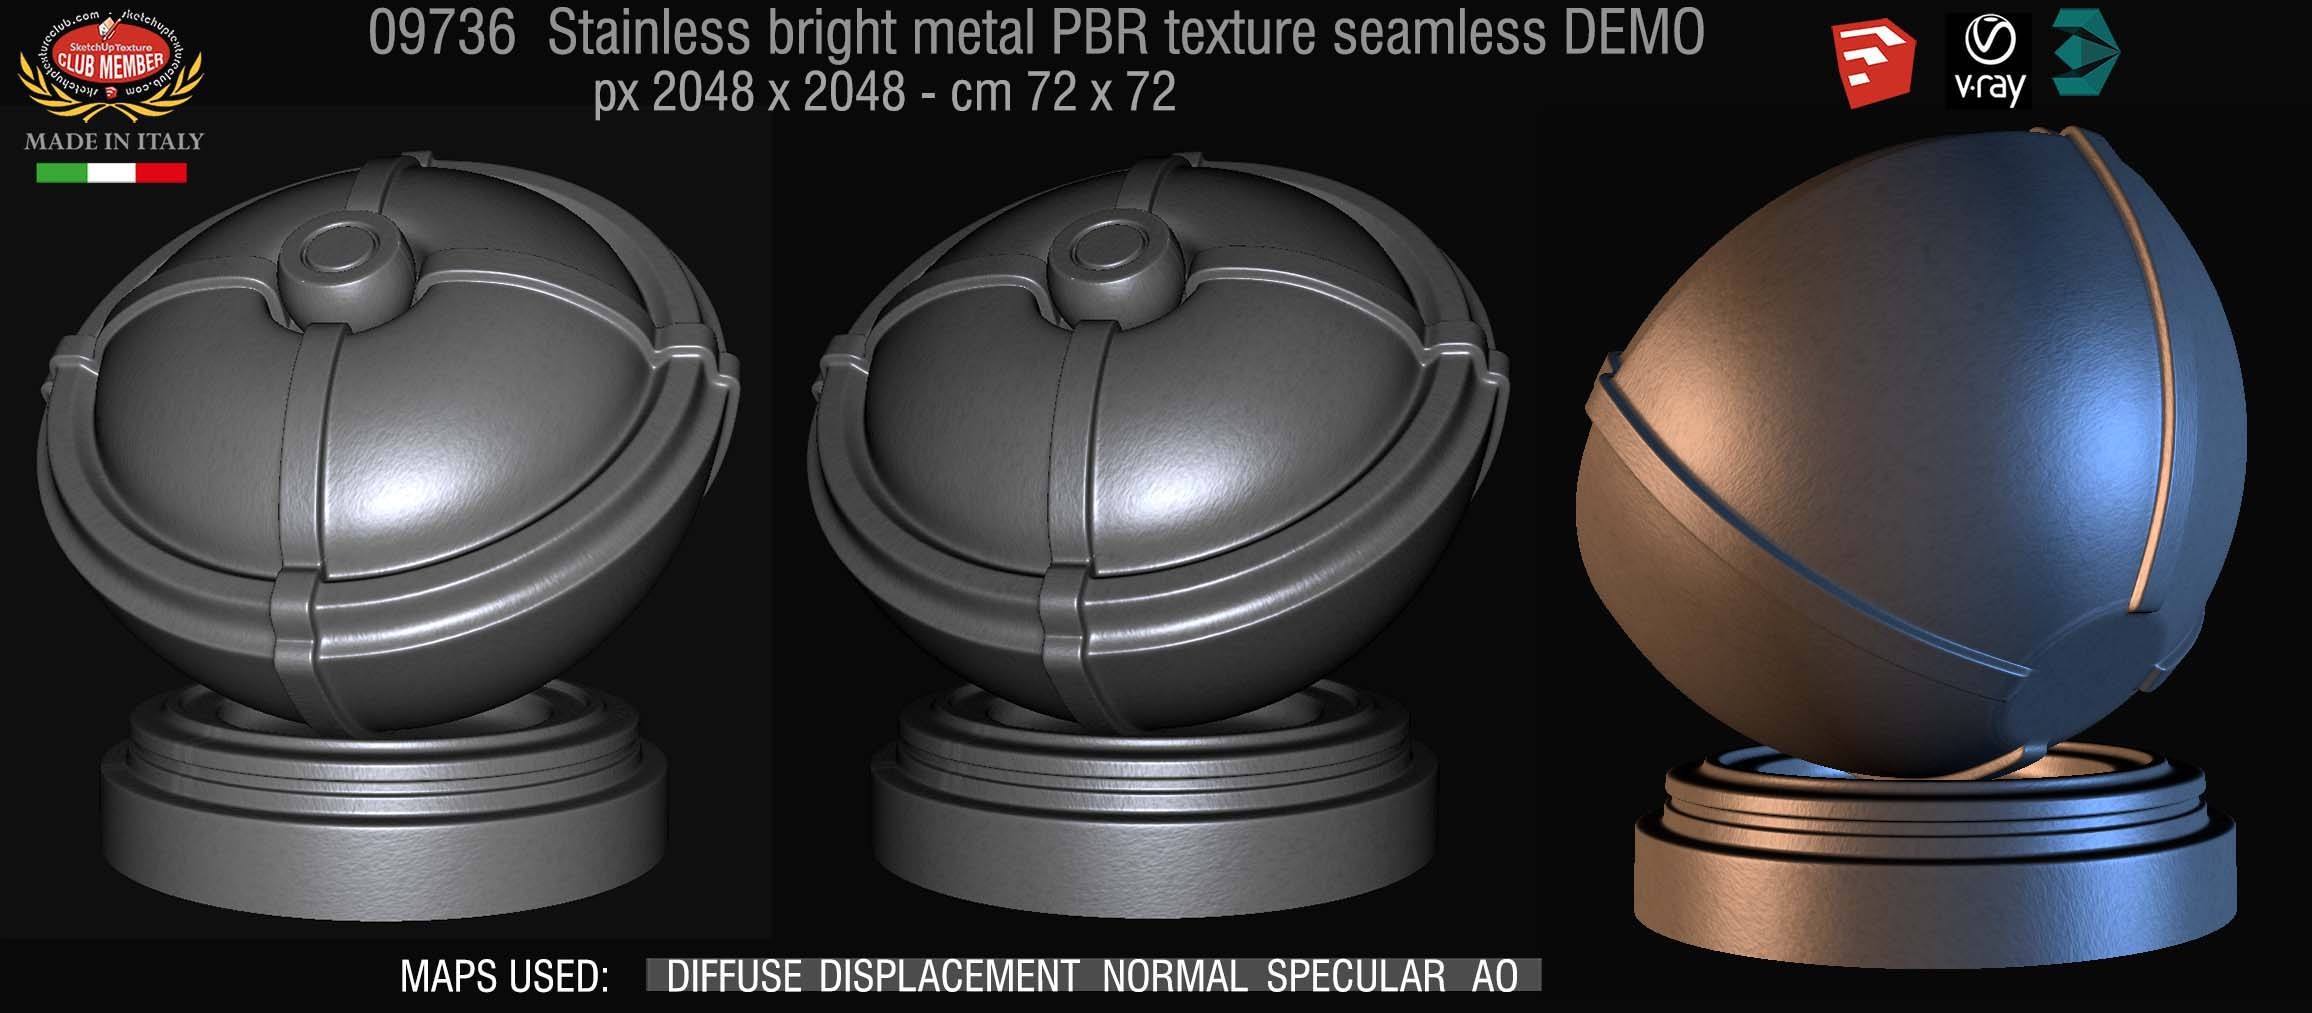 09736 stainless bright PBR metal texture demo